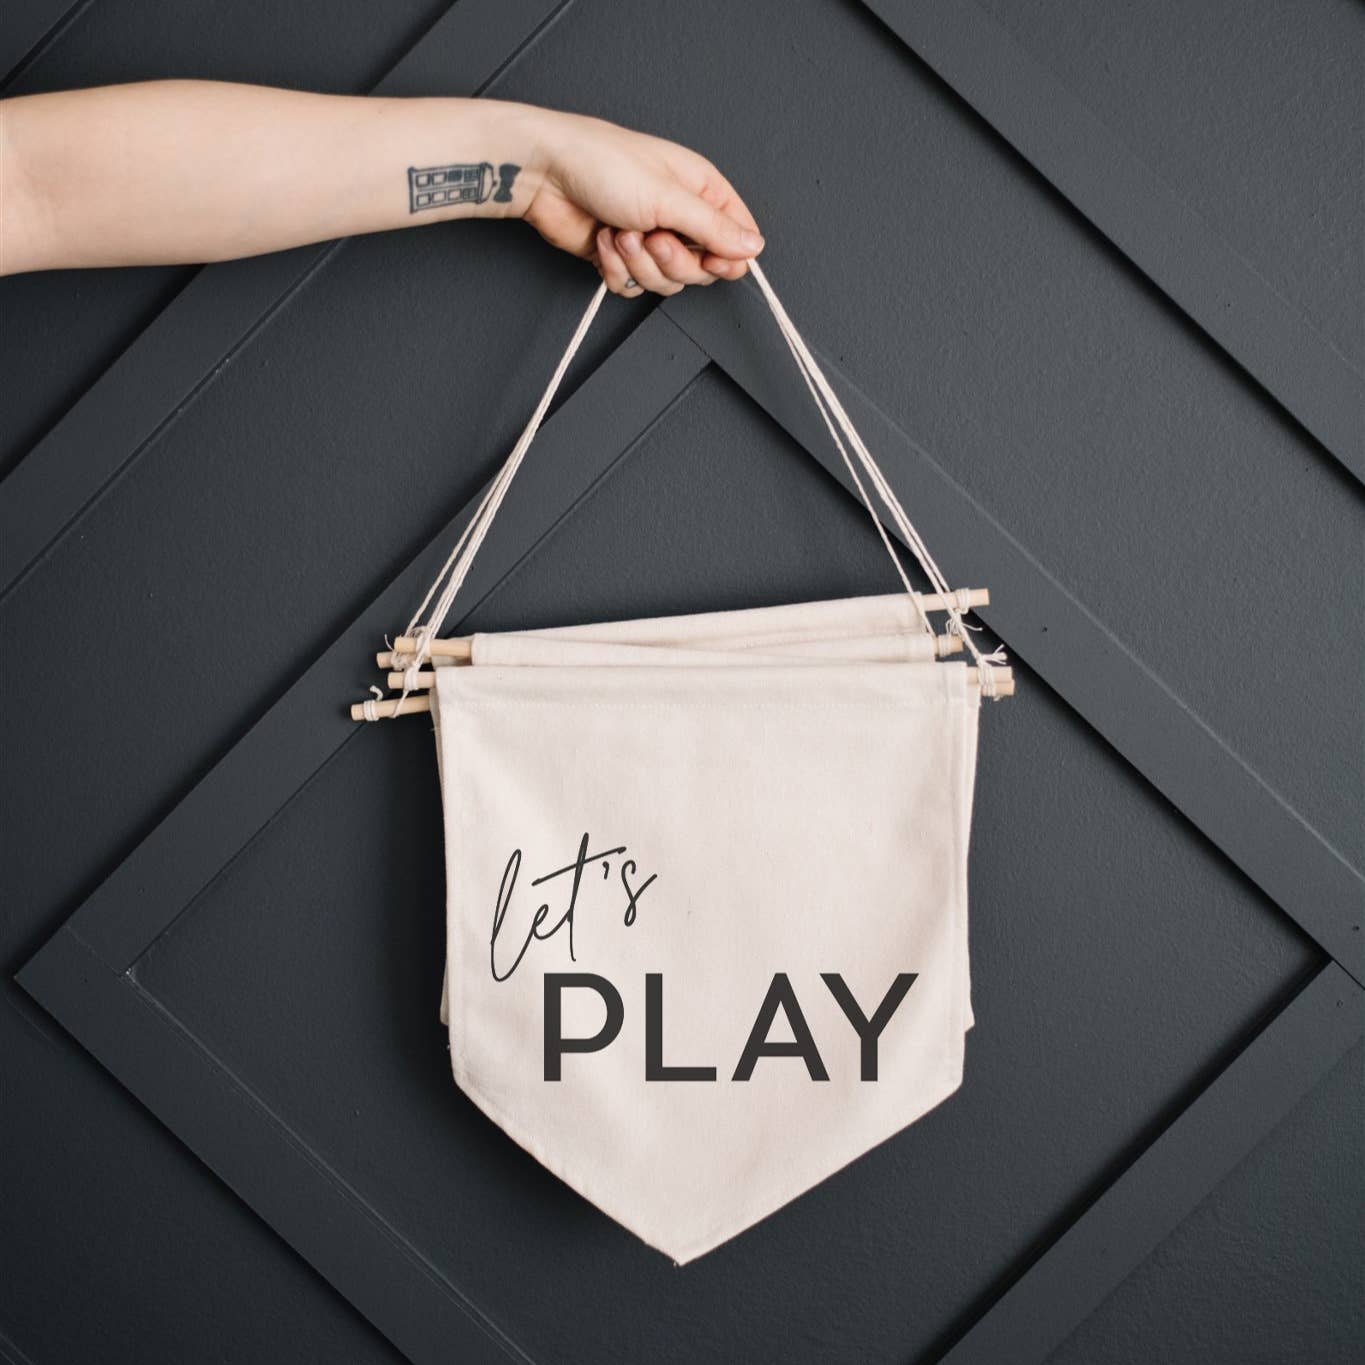 let's play Canvas Banner